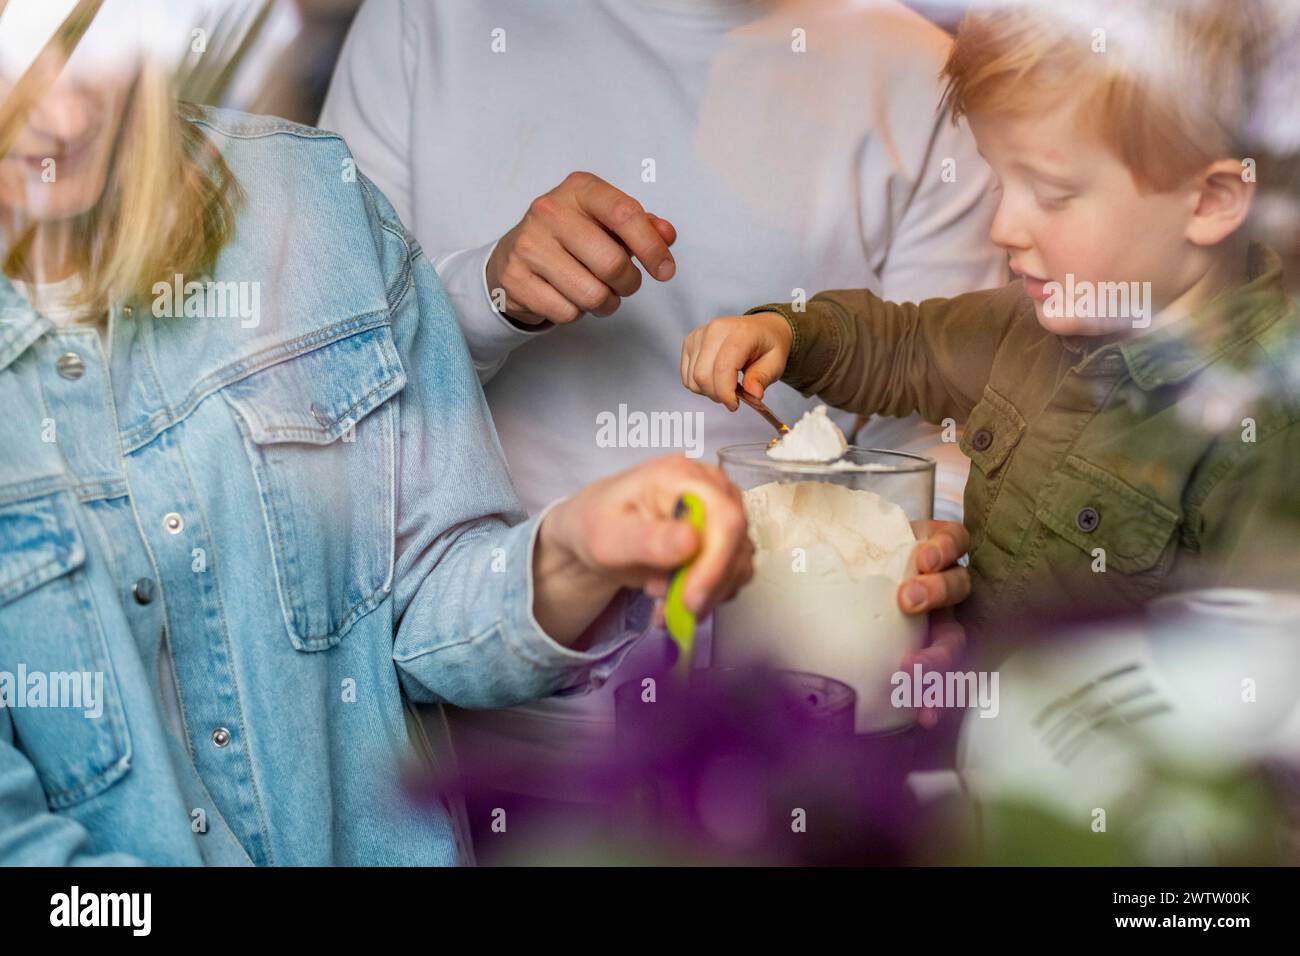 Family moment as a young child learns to scoop flour for baking with help from adults. Stock Photo